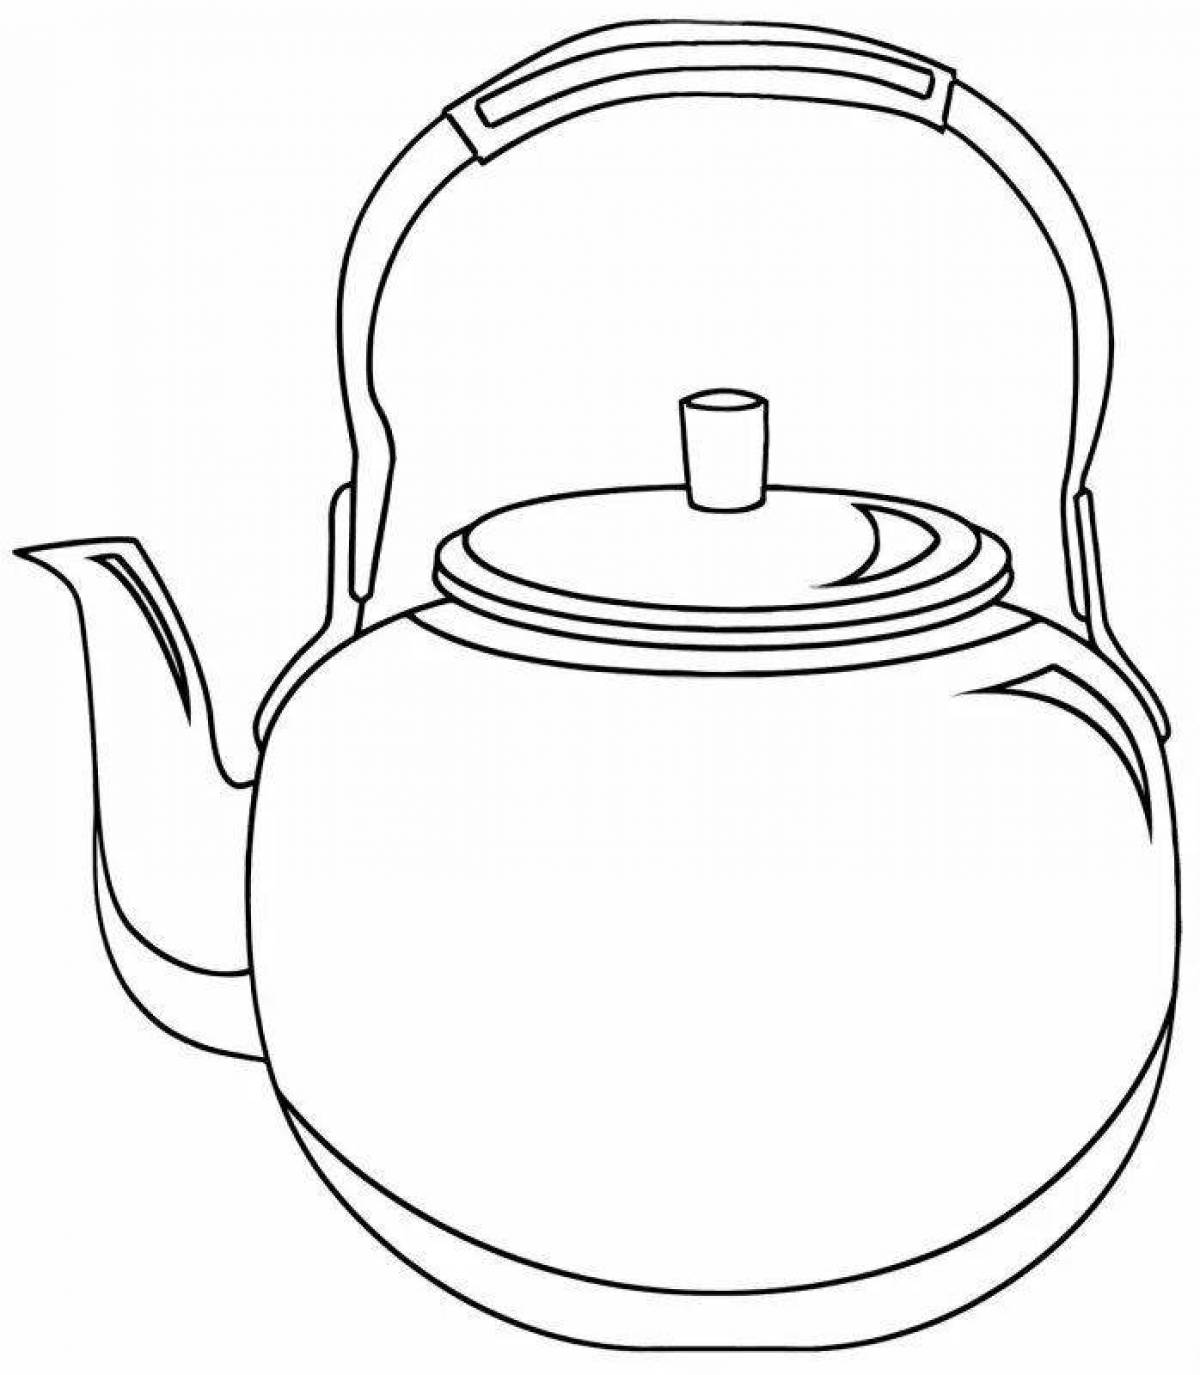 Shining teapot coloring page for kids